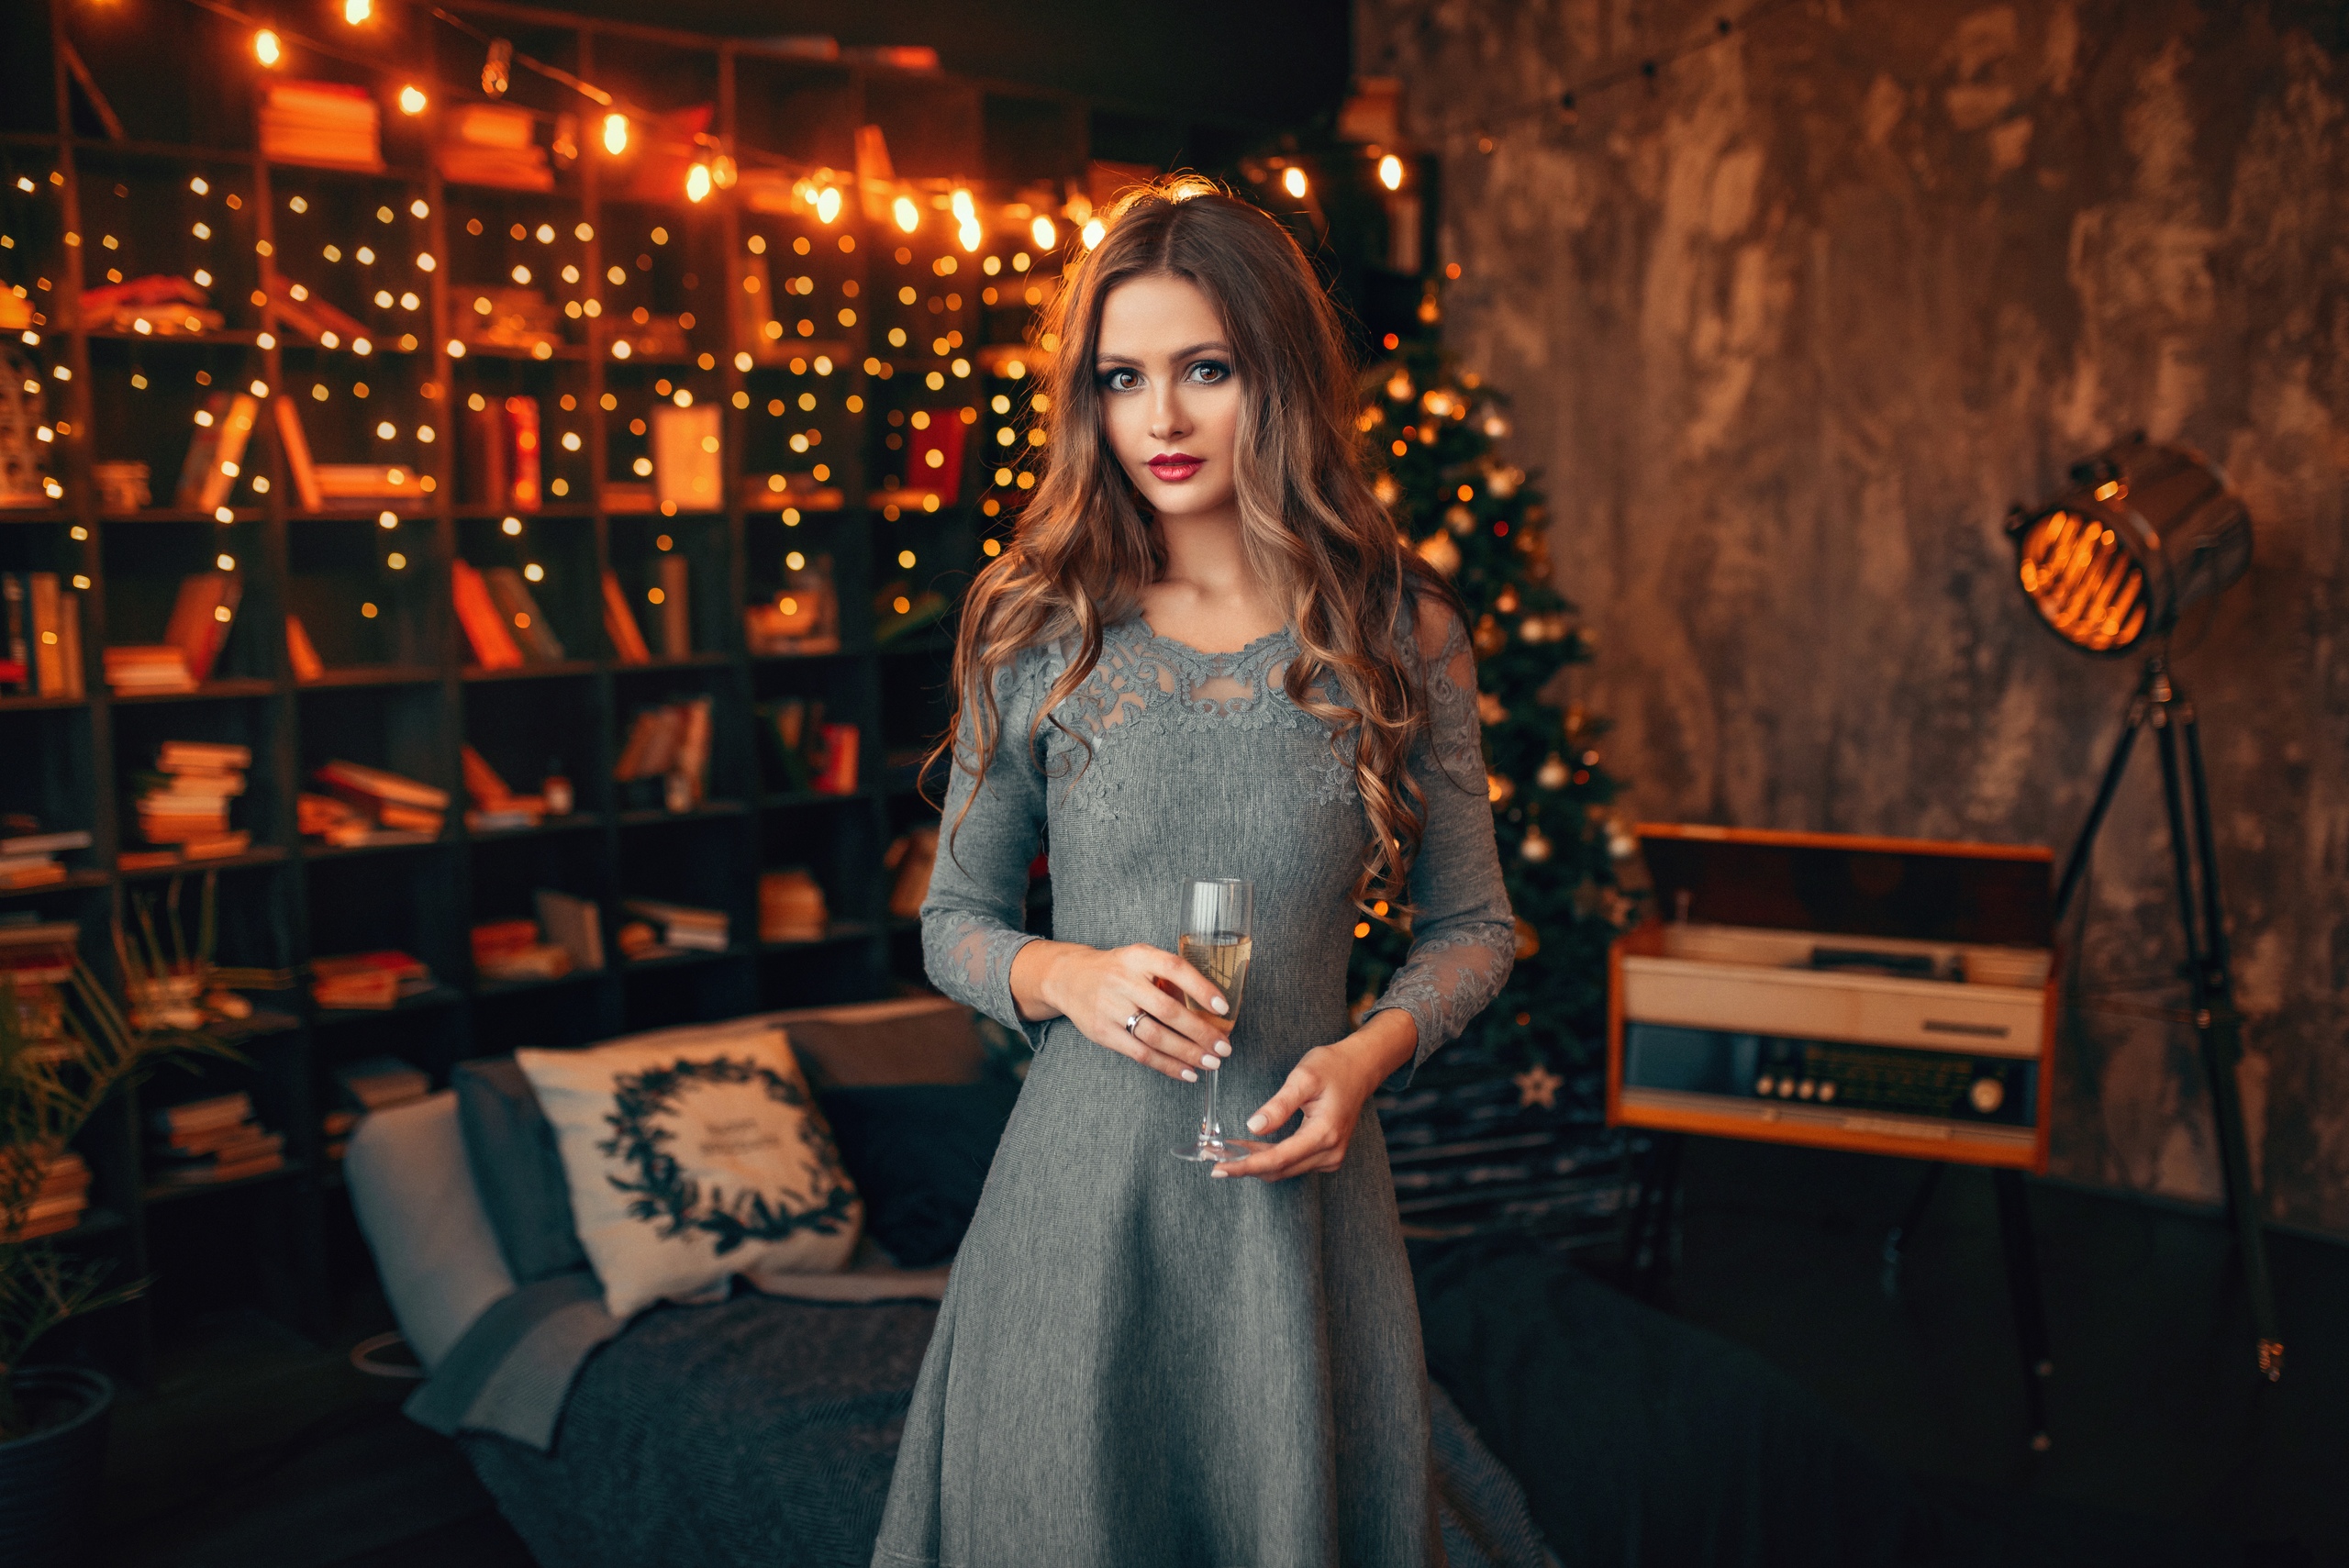 People 2560x1709 women dress drinking glass bed painted nails red lipstick Christmas tree Christmas gray dress in bedroom long hair women indoors closed mouth classy glass of wine